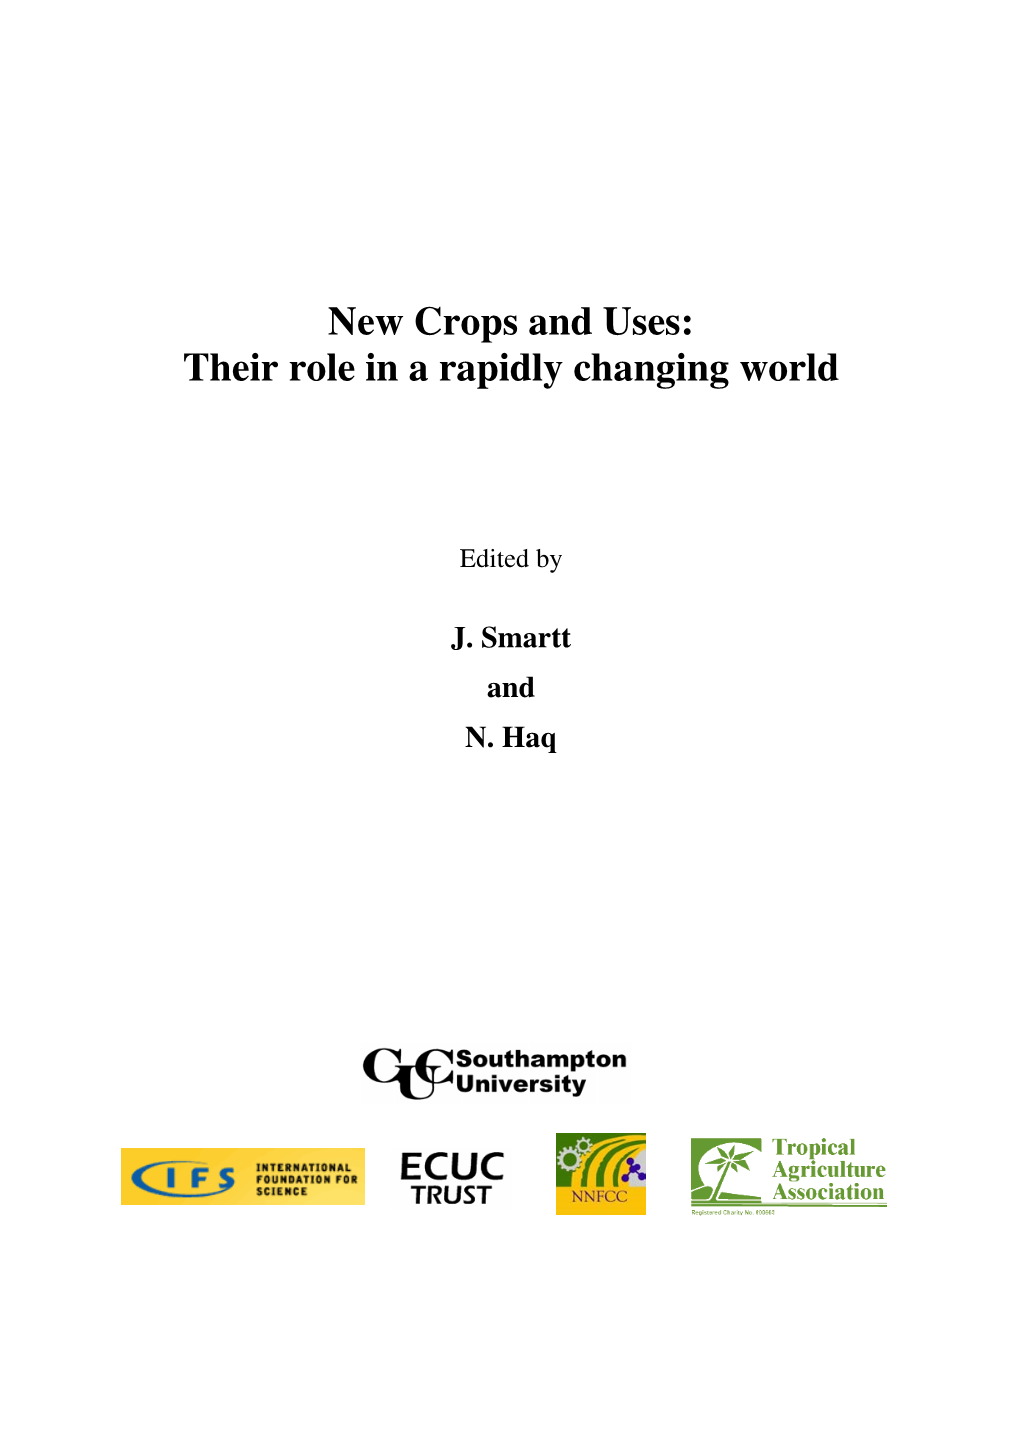 New Crops and Uses: Their Role in a Rapidly Changing World